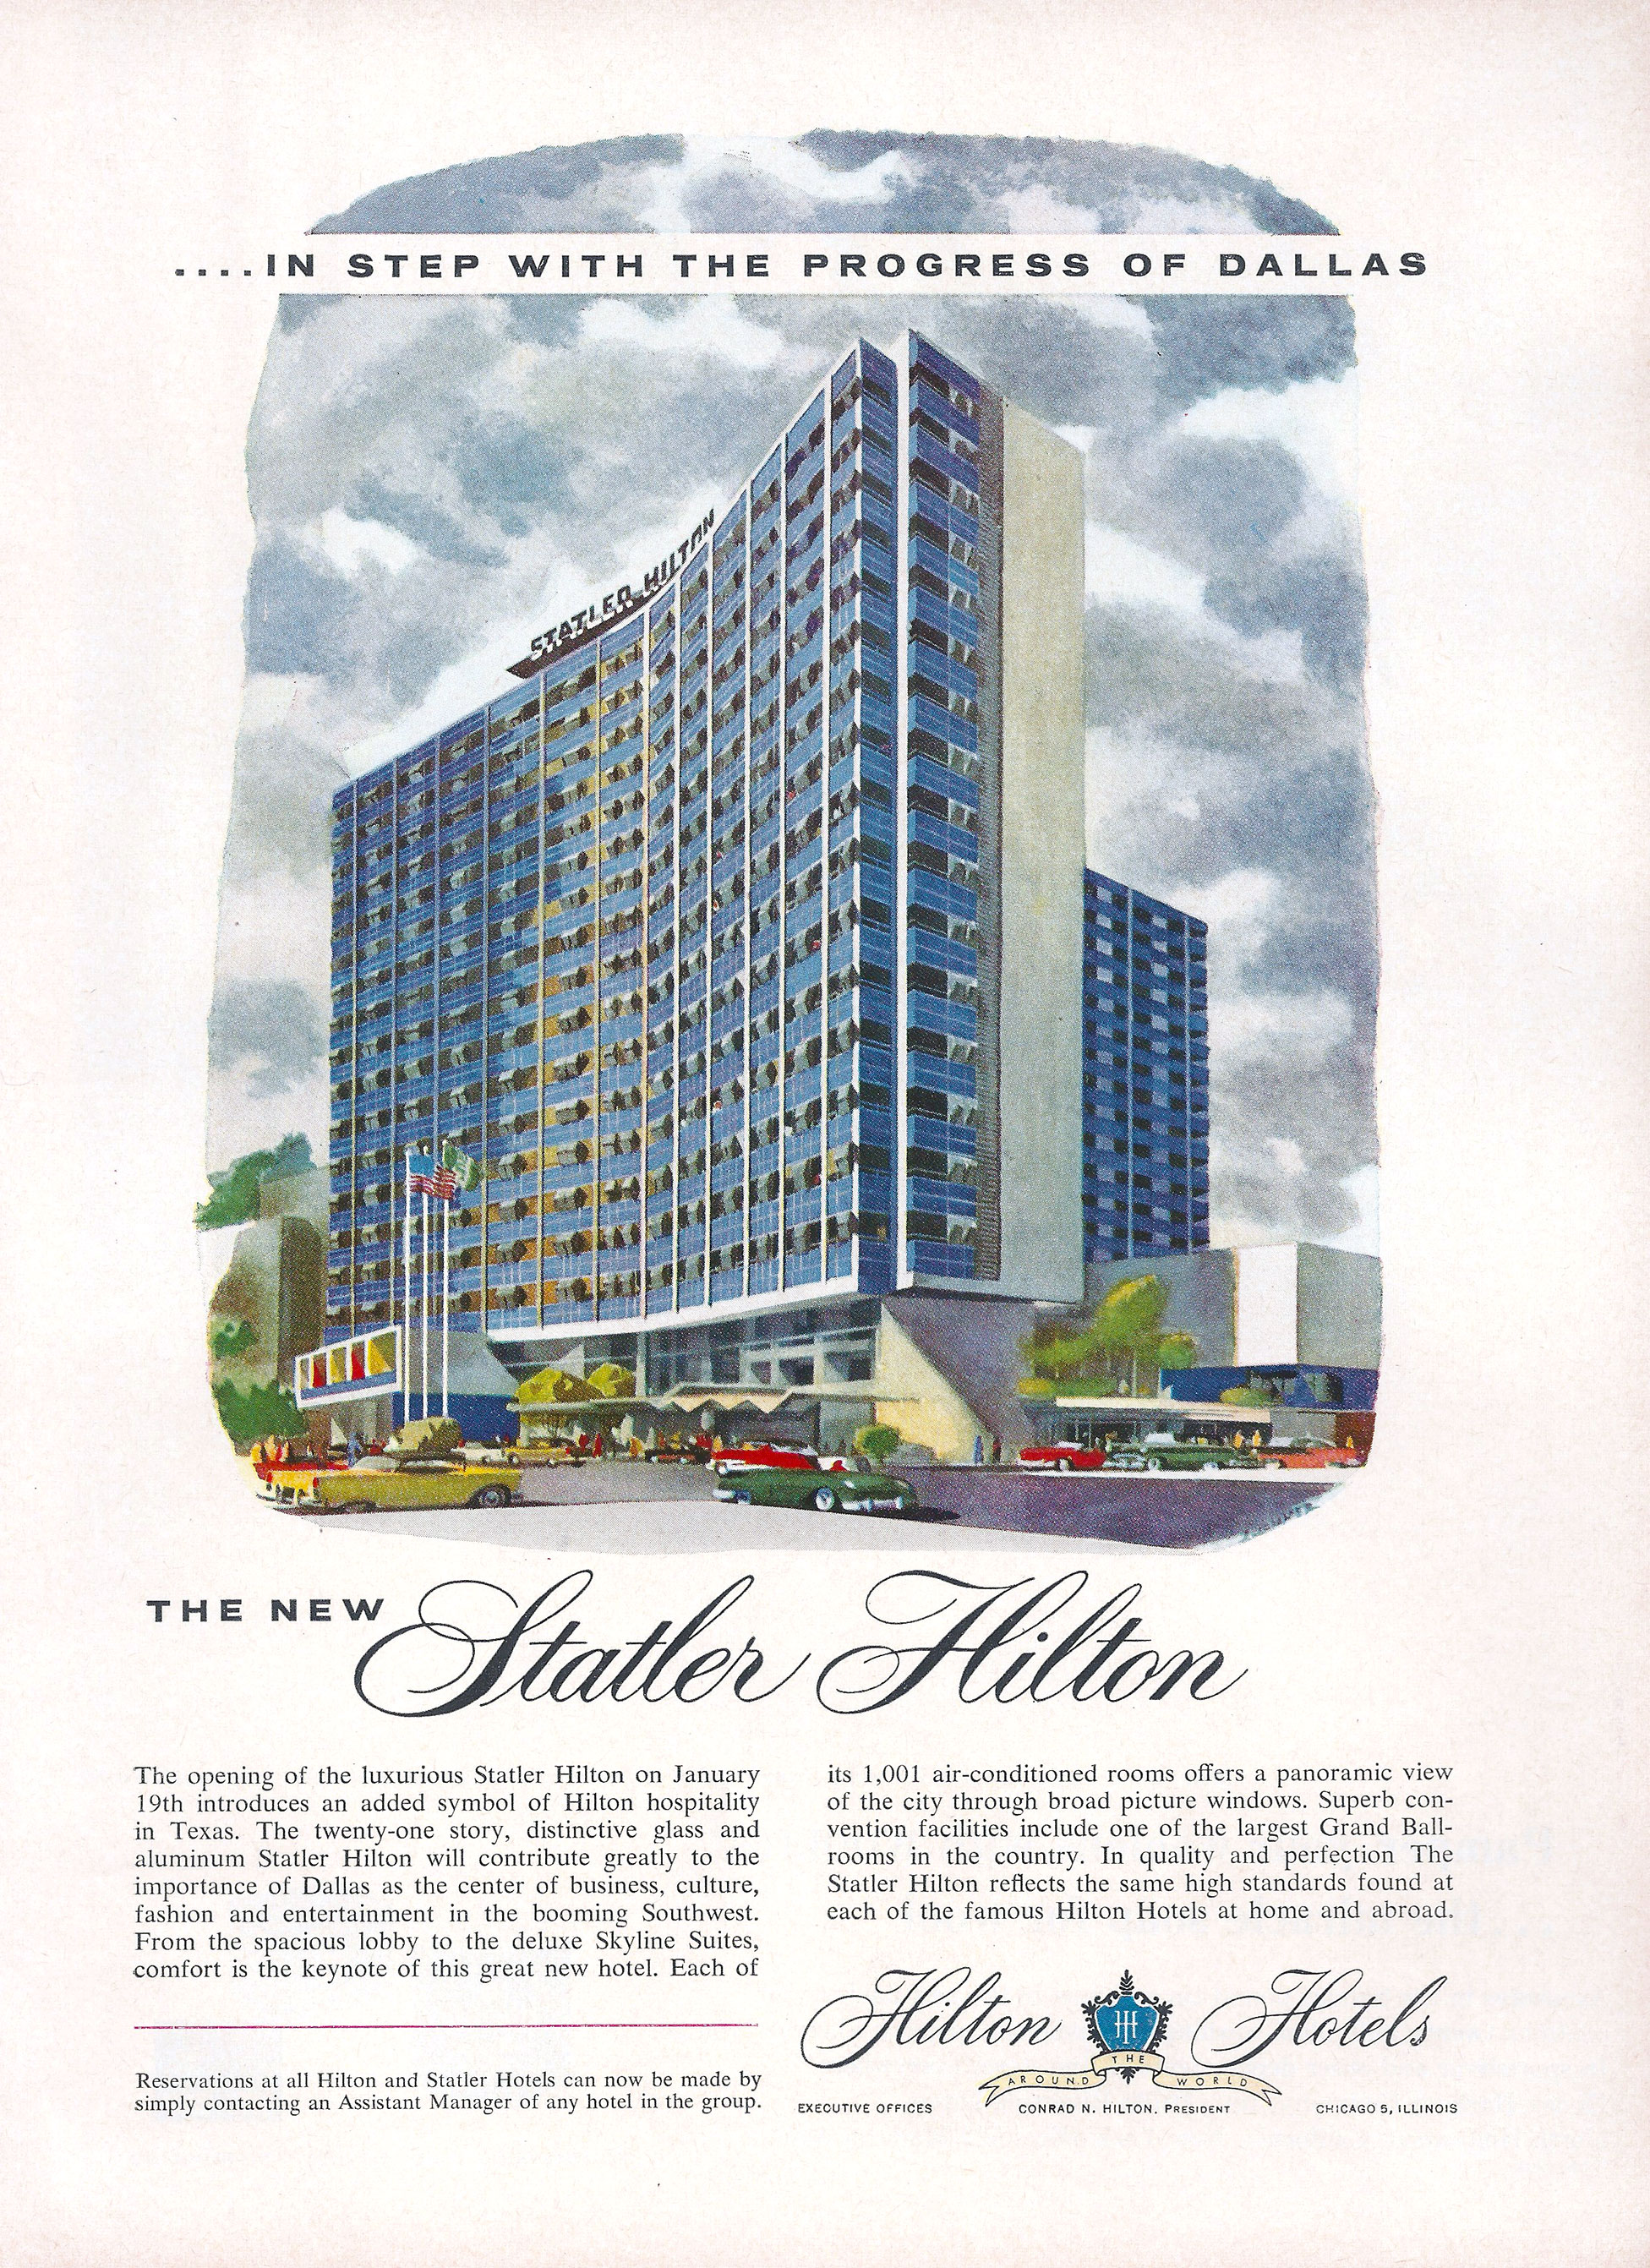 The Statler Hilton Hotel, in Sketches